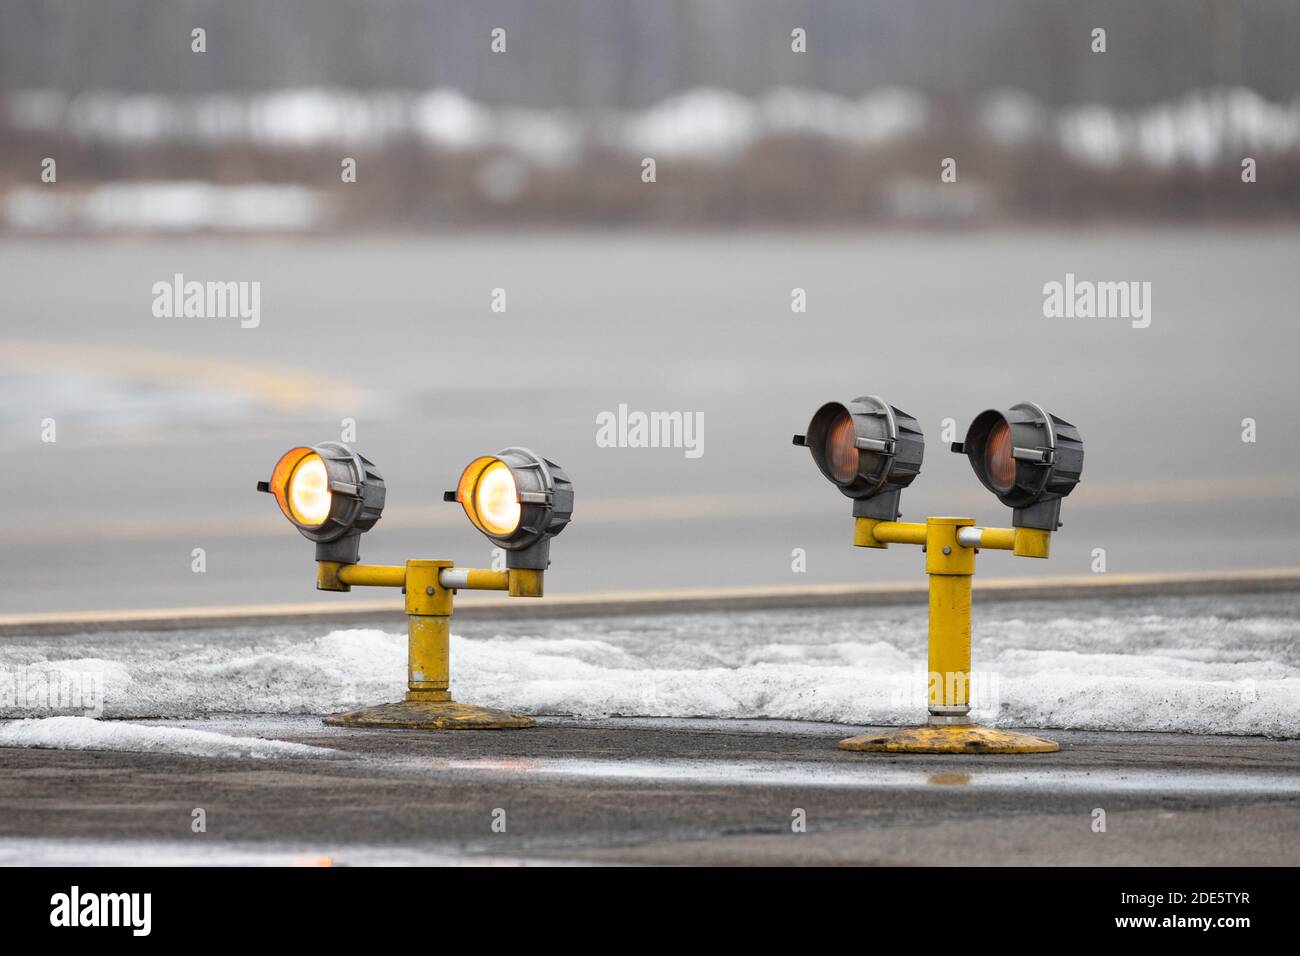 Airport runway guarding lights, traffic safety lights in winter time. Stock Photo